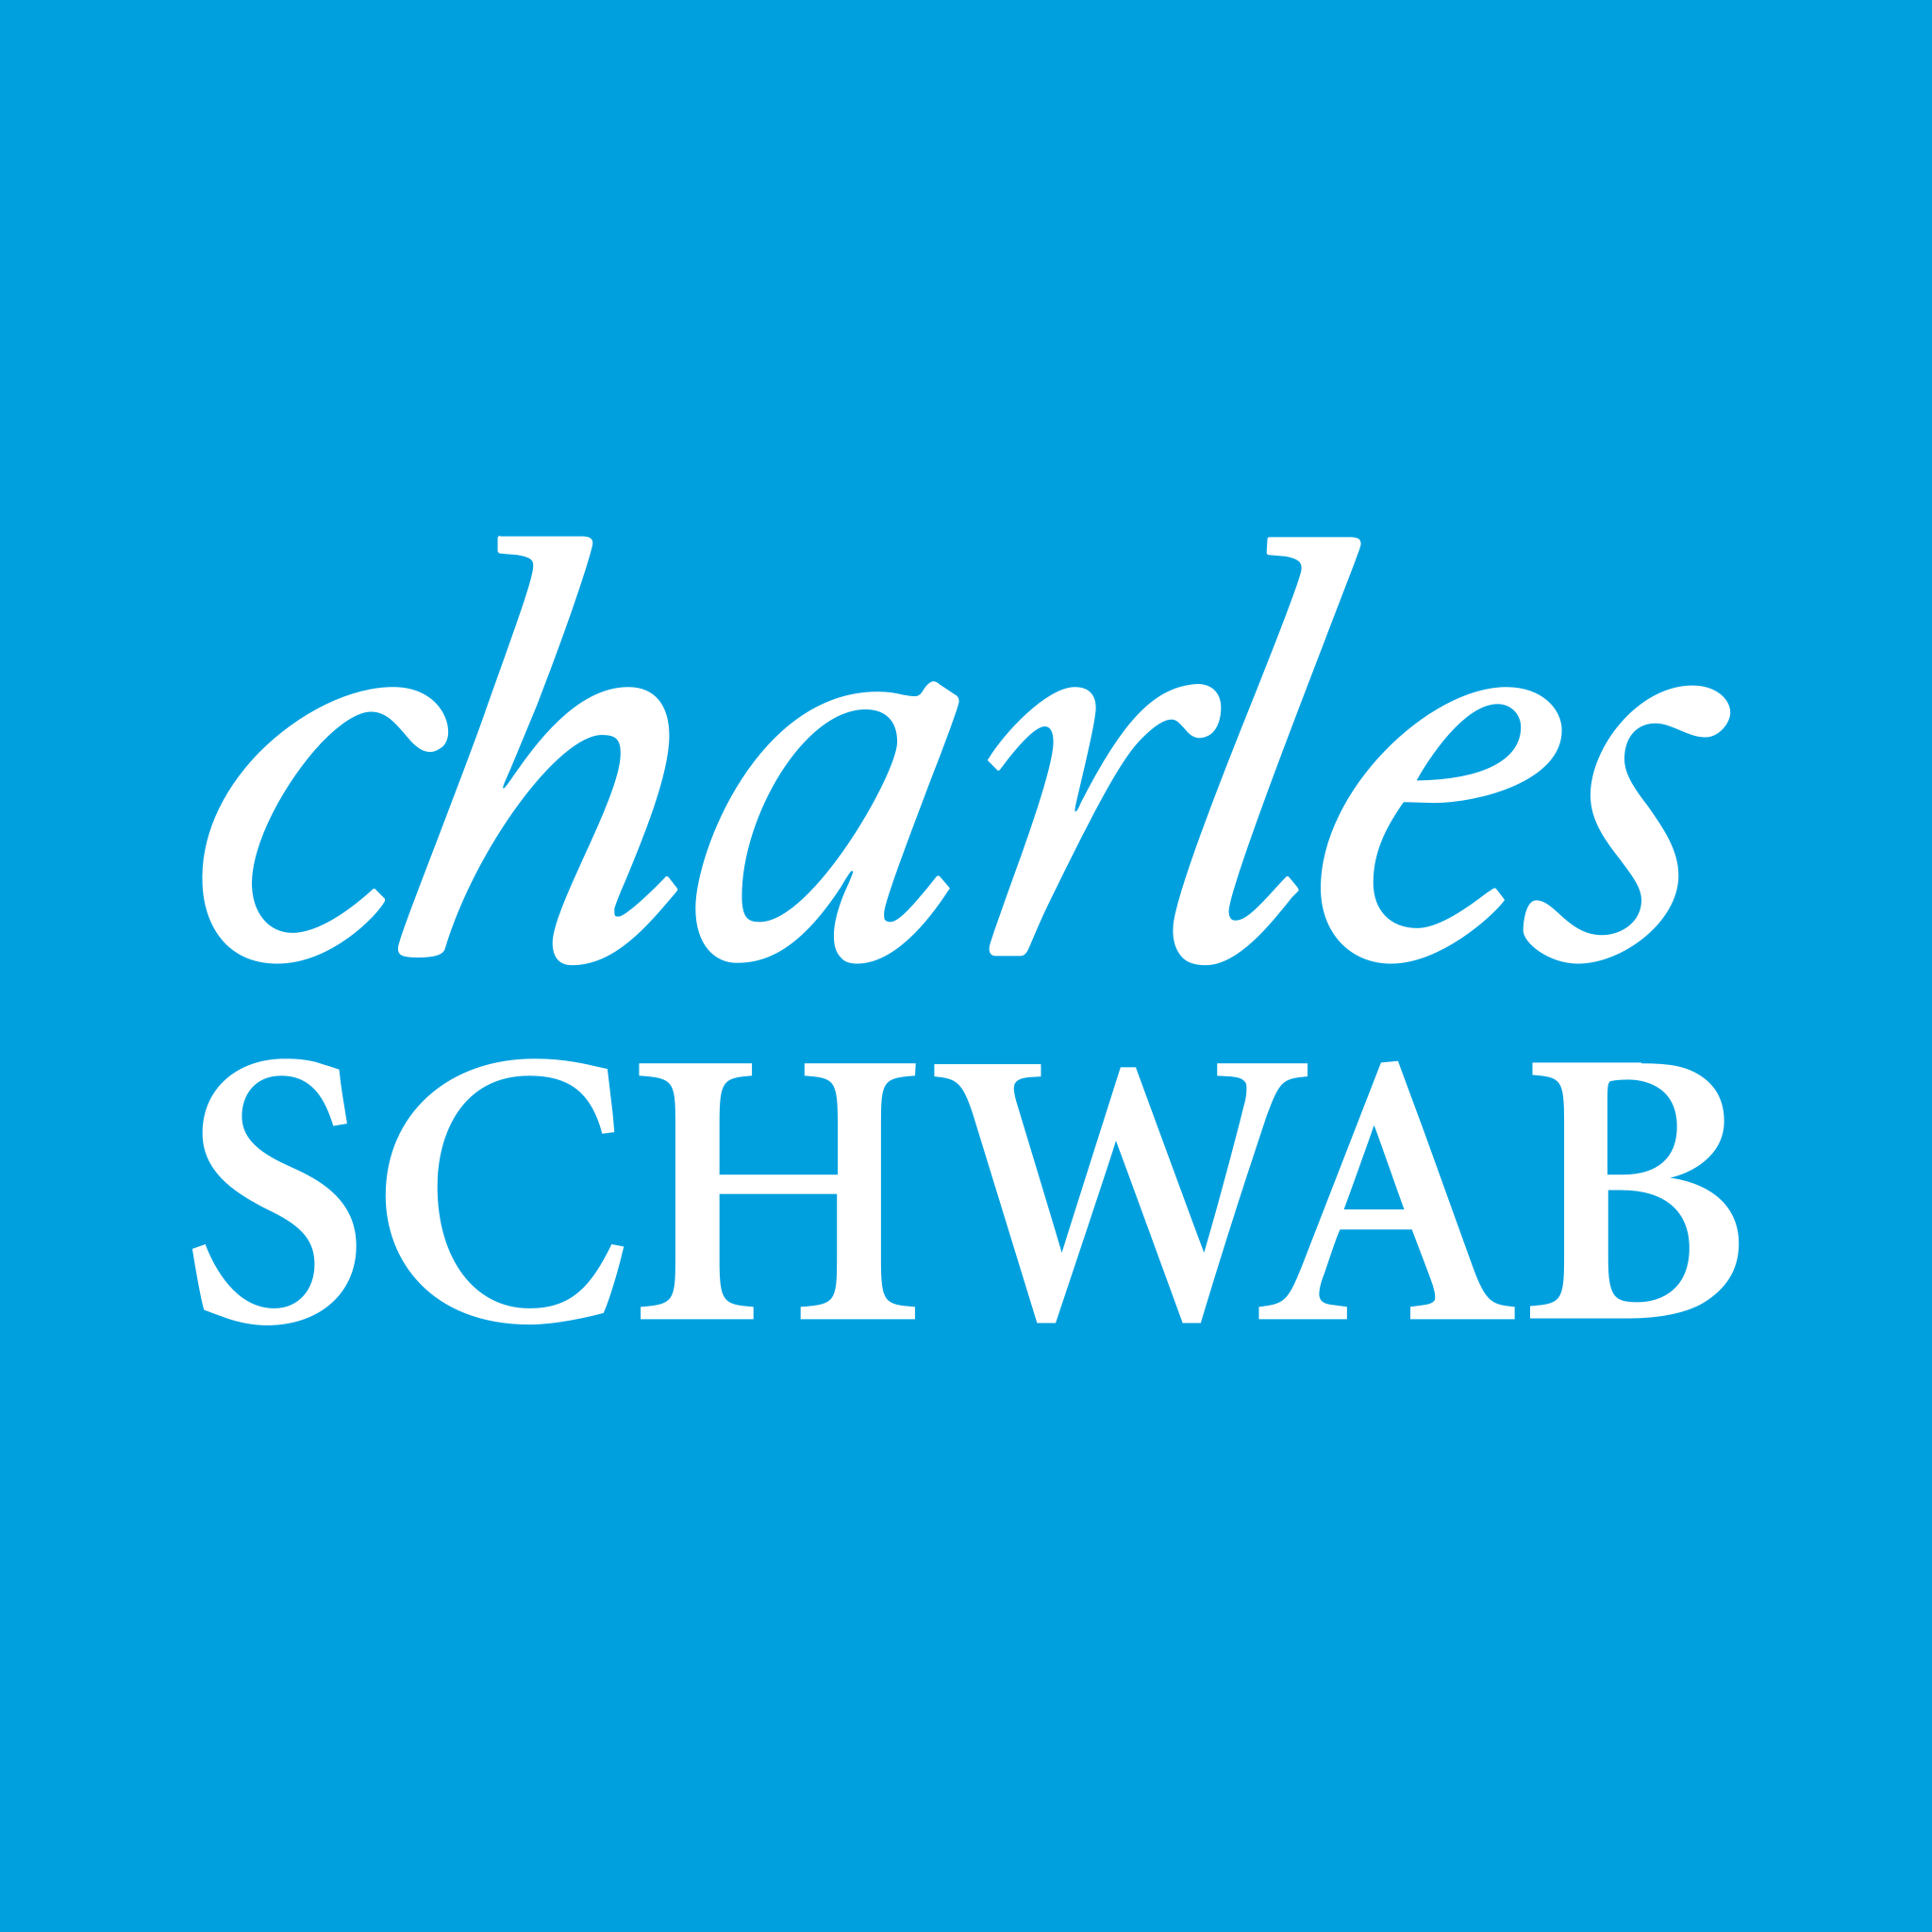 Charles Schwab FIRE Investment Company